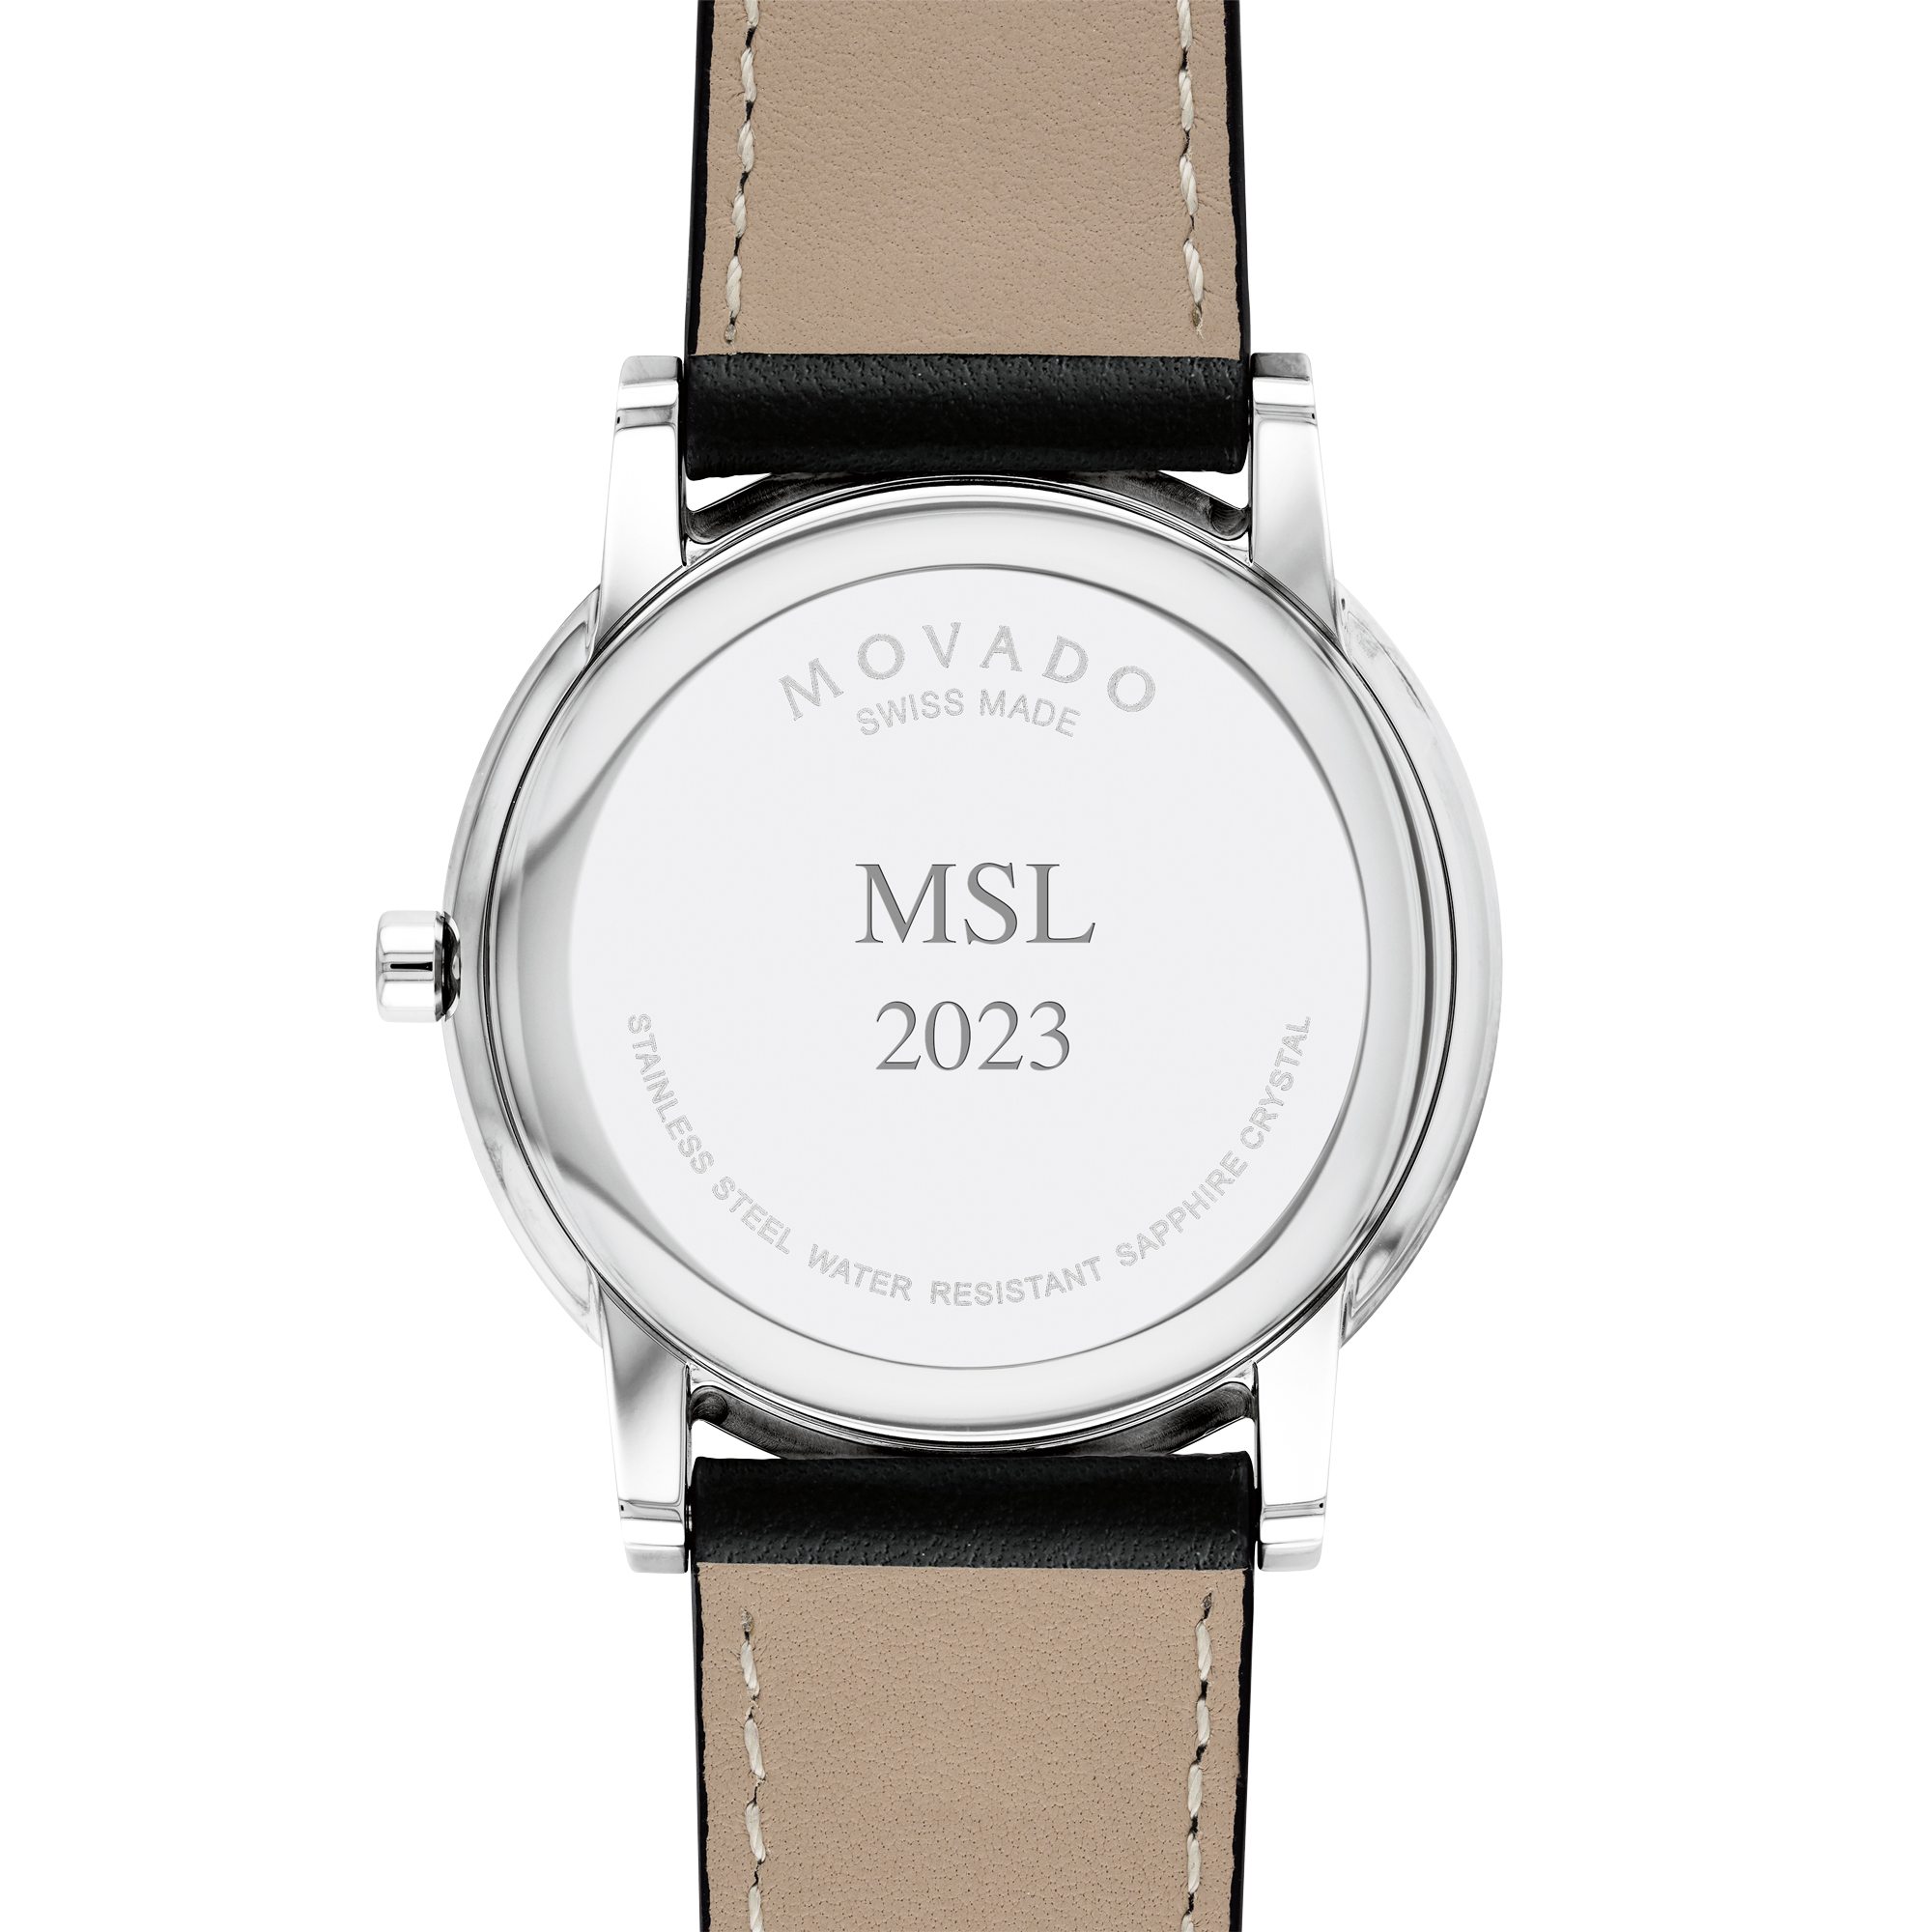 University of Kentucky Men's Movado Museum with Leather Strap - Image 3